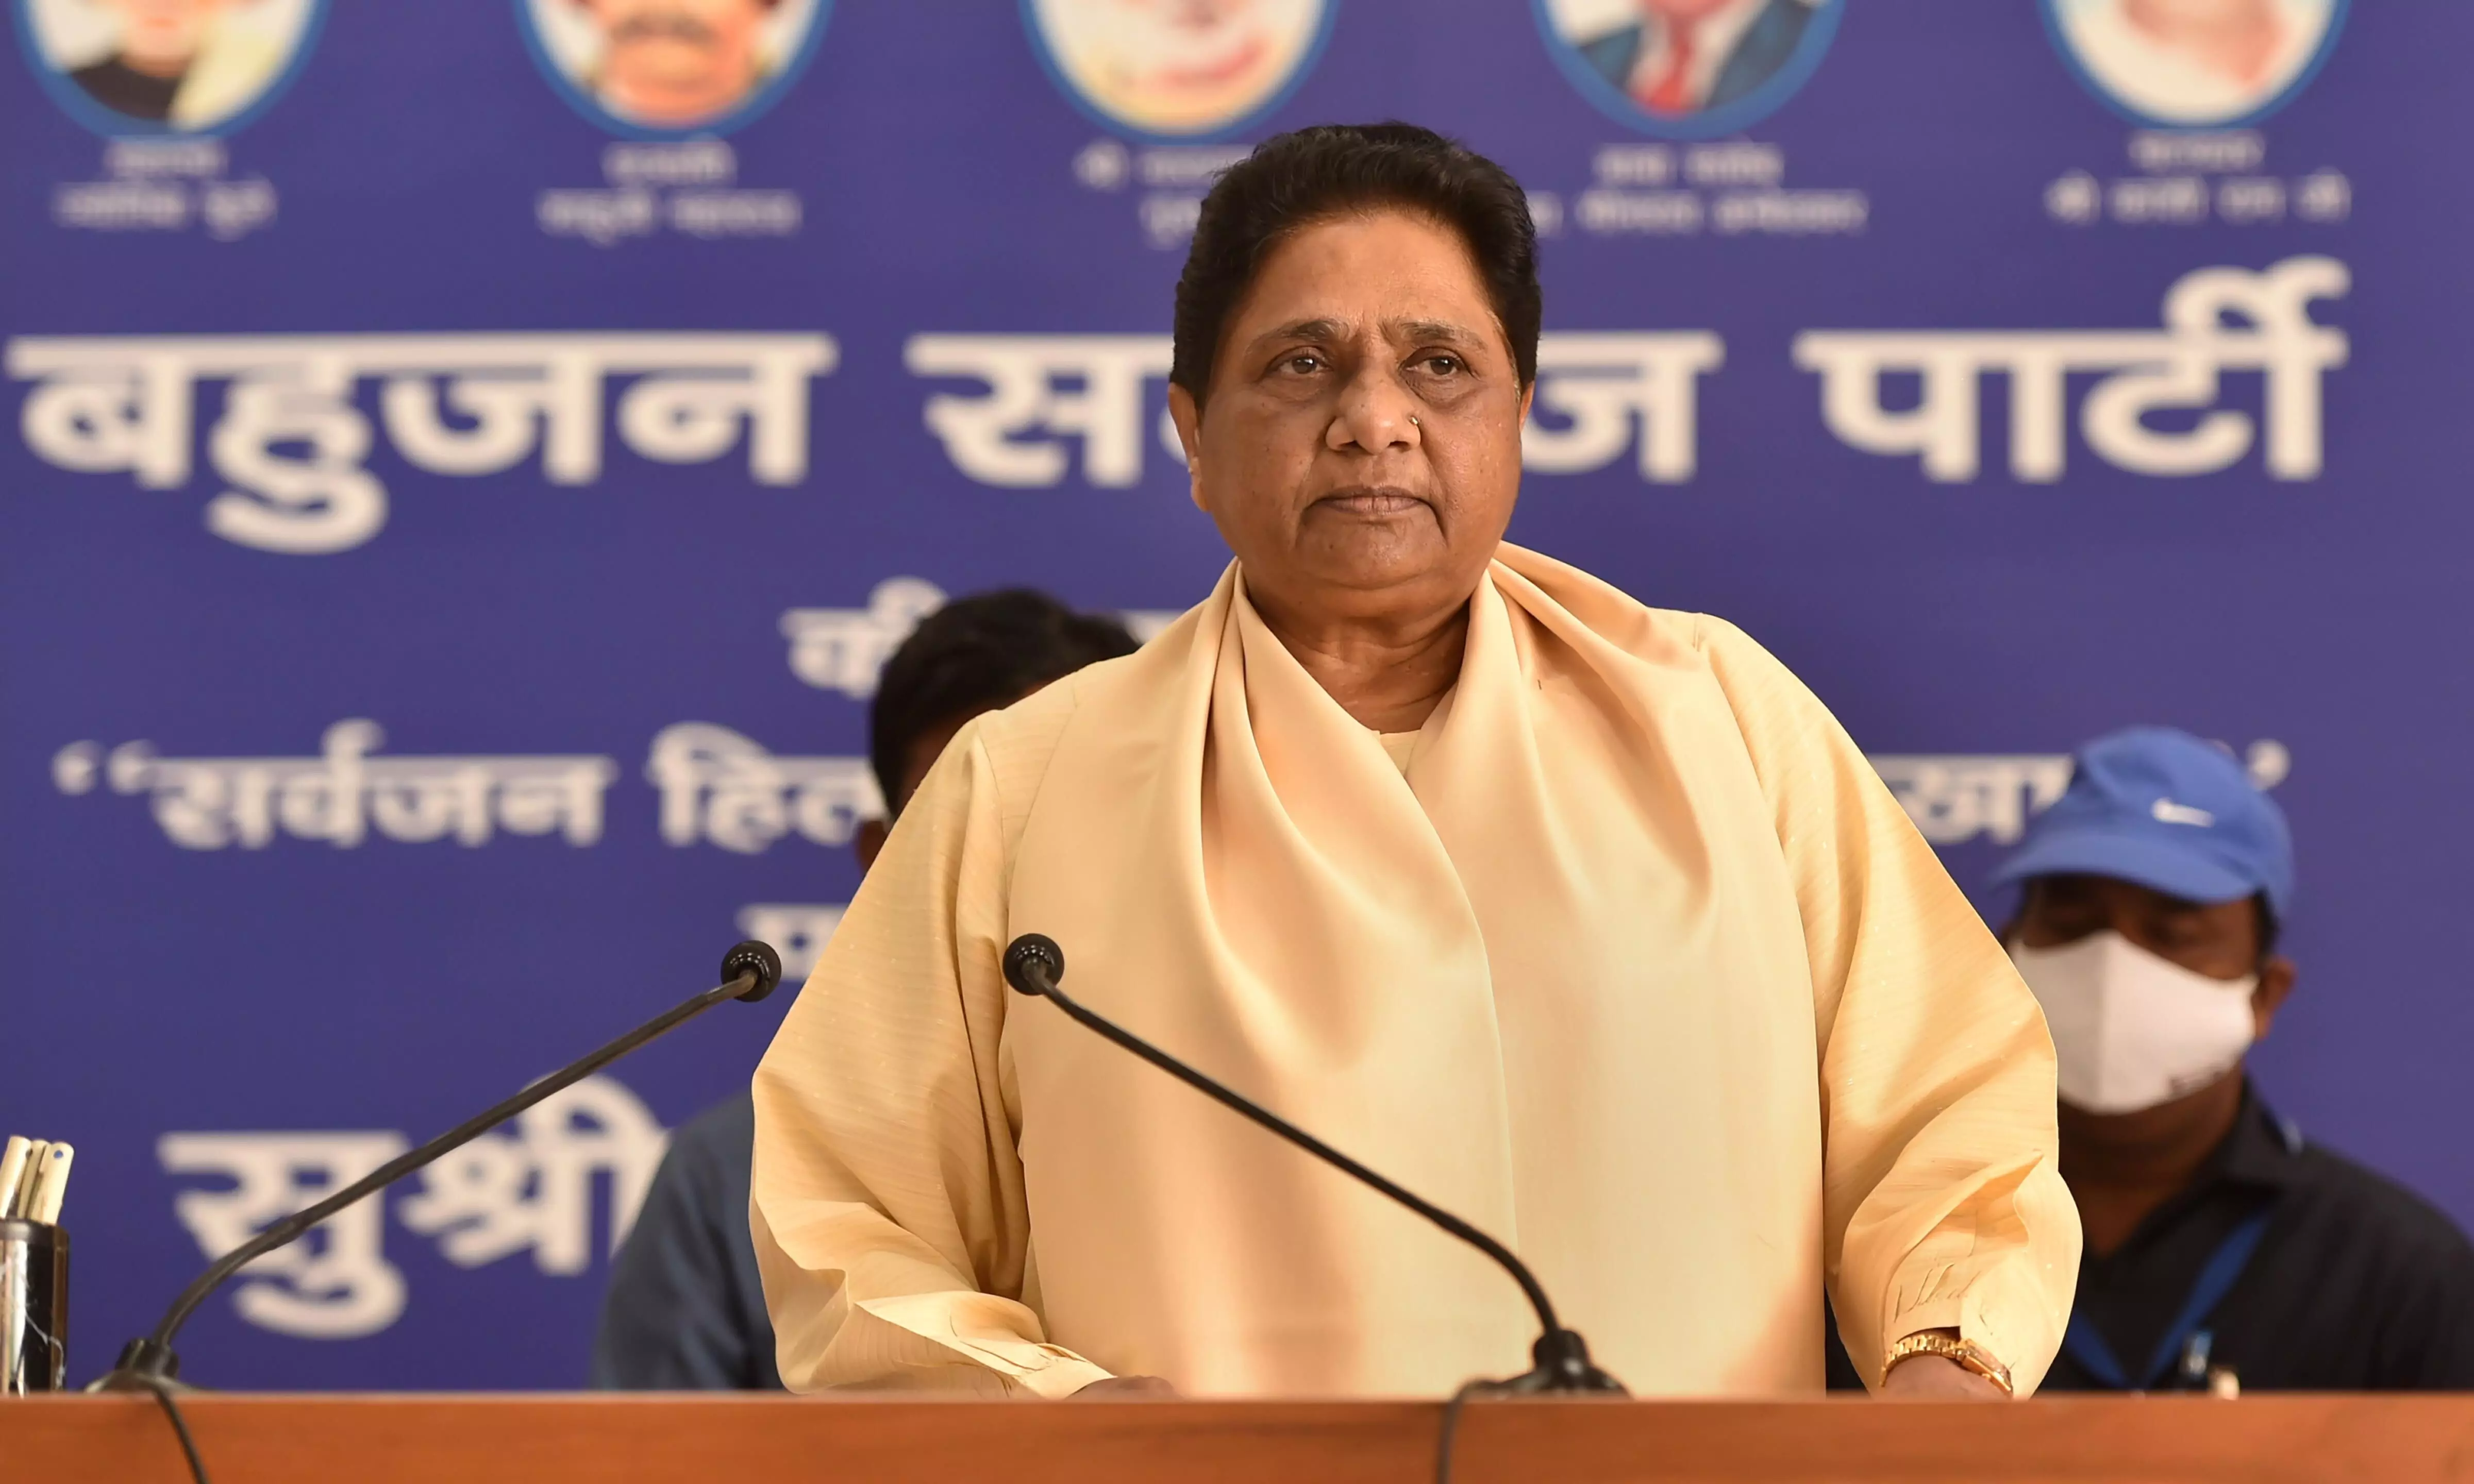 BJP got its acche din but where are the acche din it promised, asks Mayawati